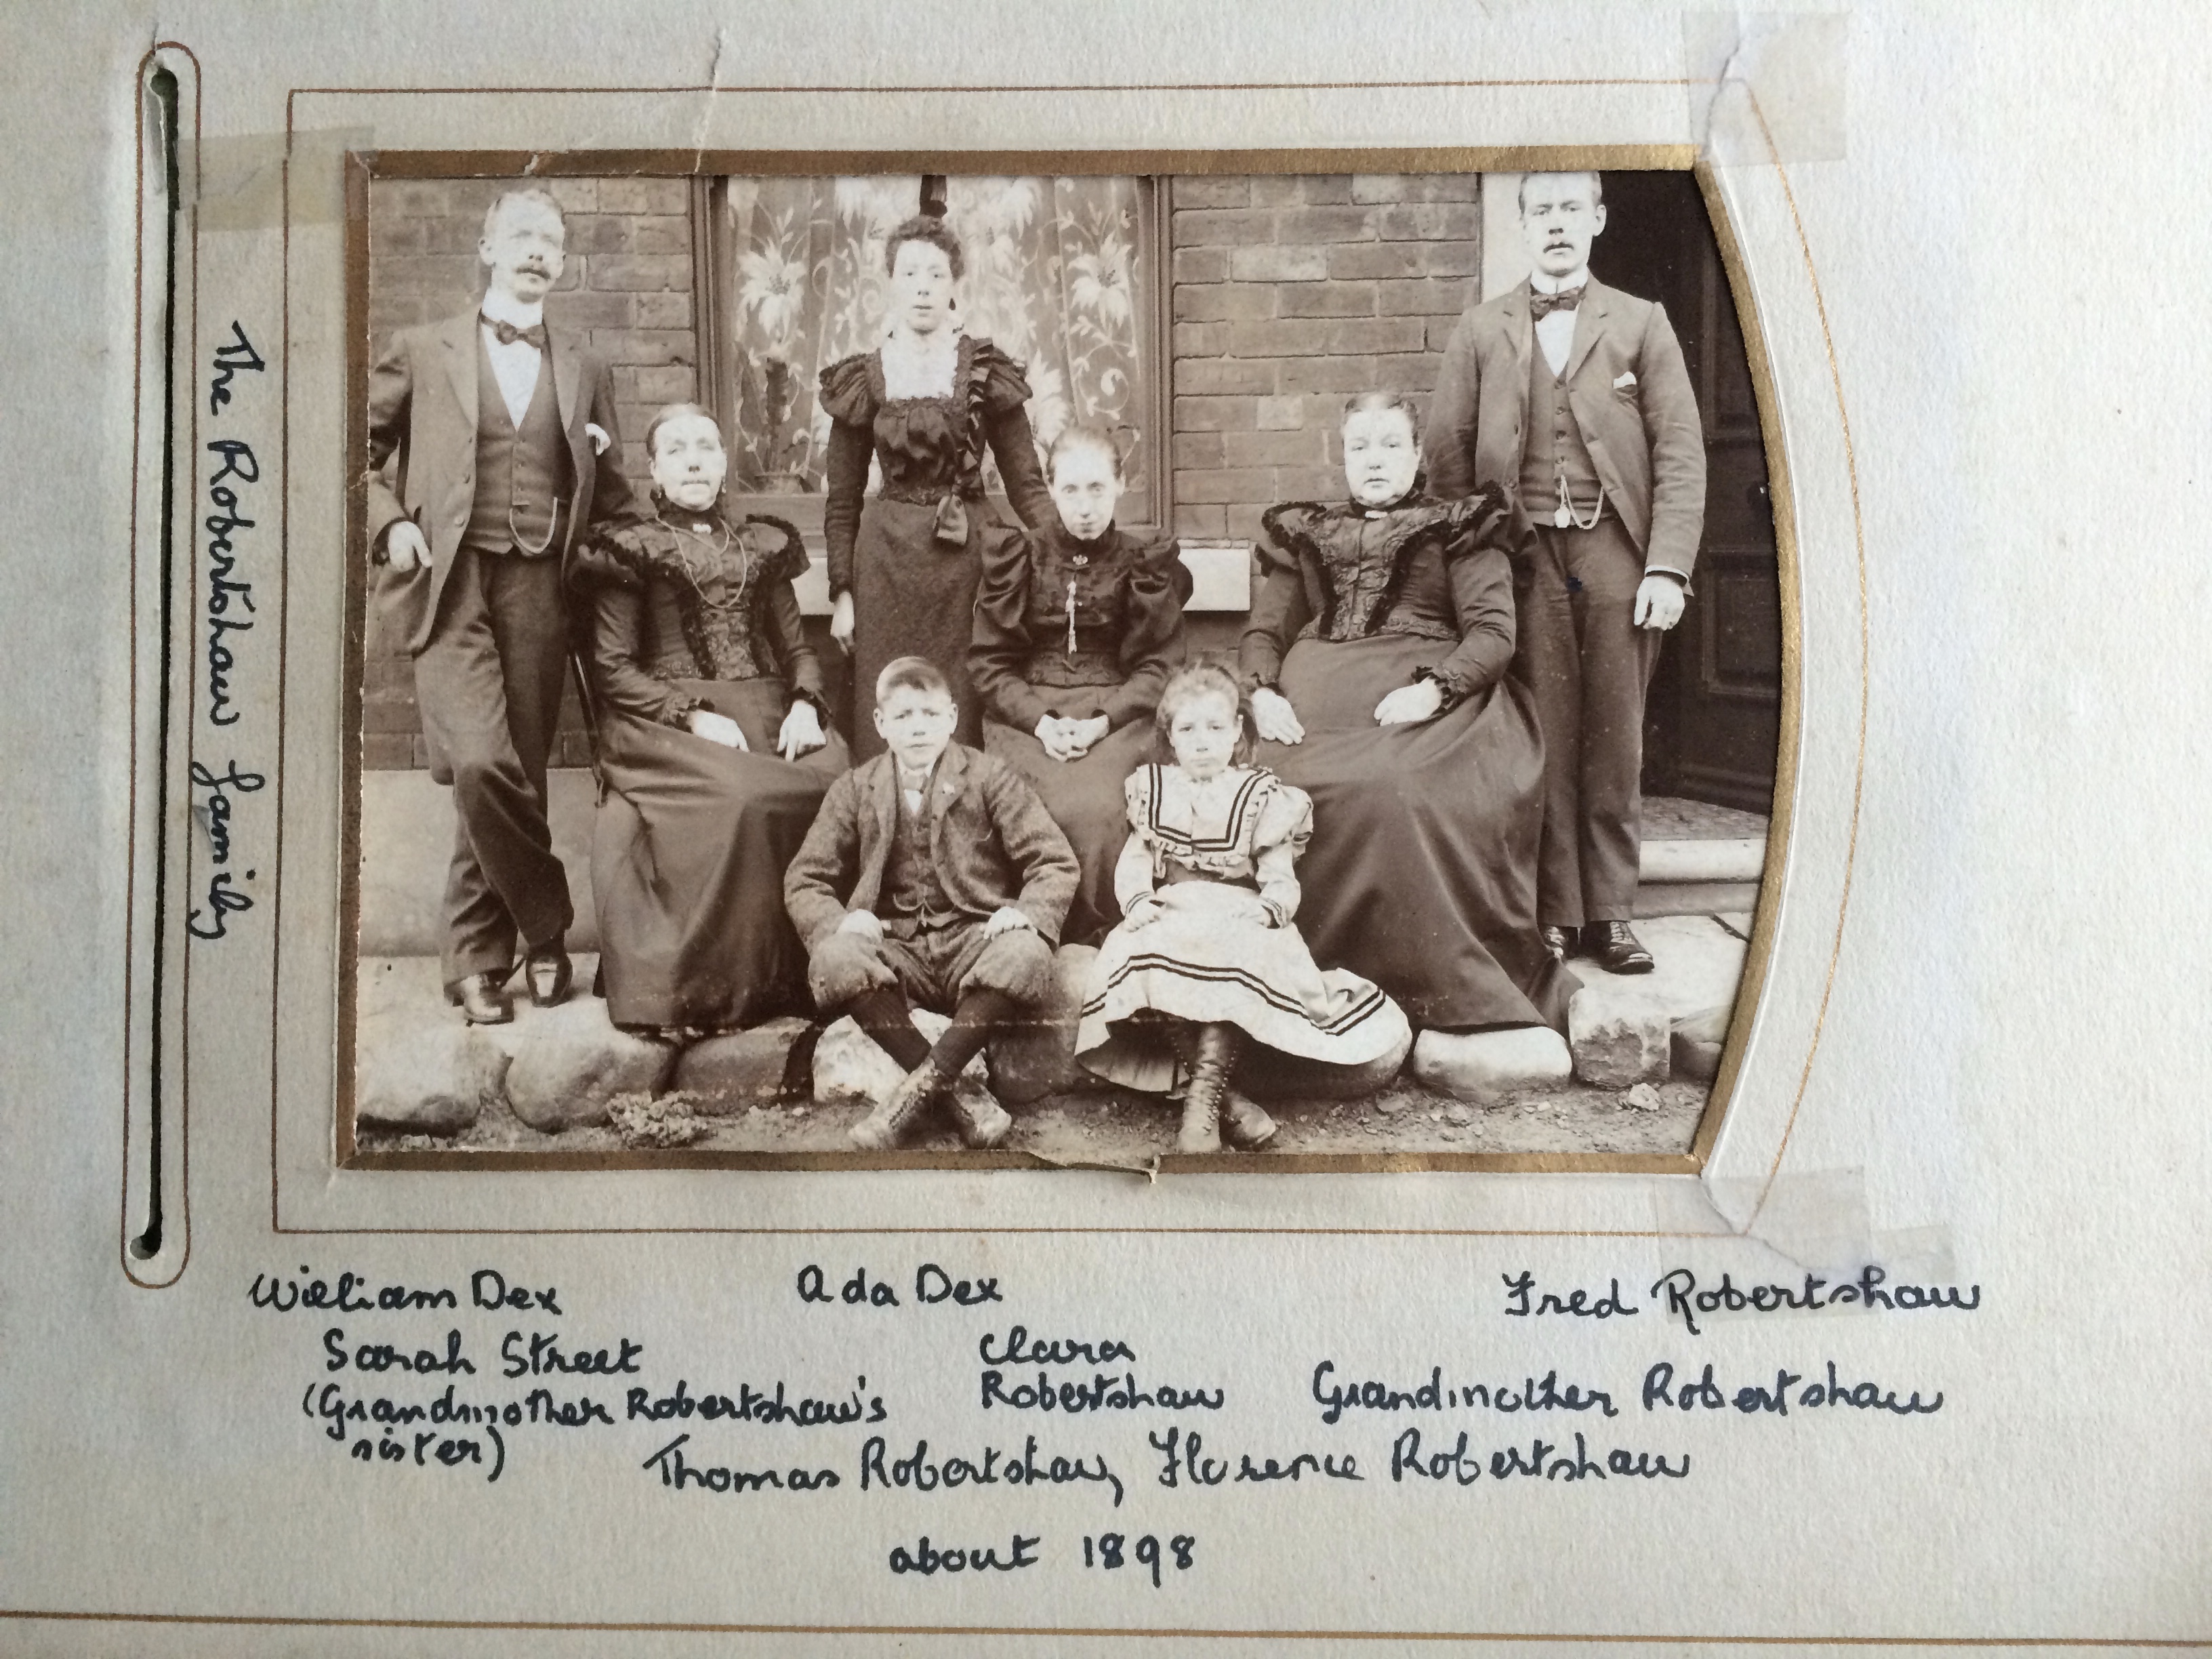 Grandmother Robertshaw (Ann née Buckley) and family from Florence Middlemiss’s historic album — I presume either written by Florence Robertshaw or written in the sense of Ann was grandmother in the picture.